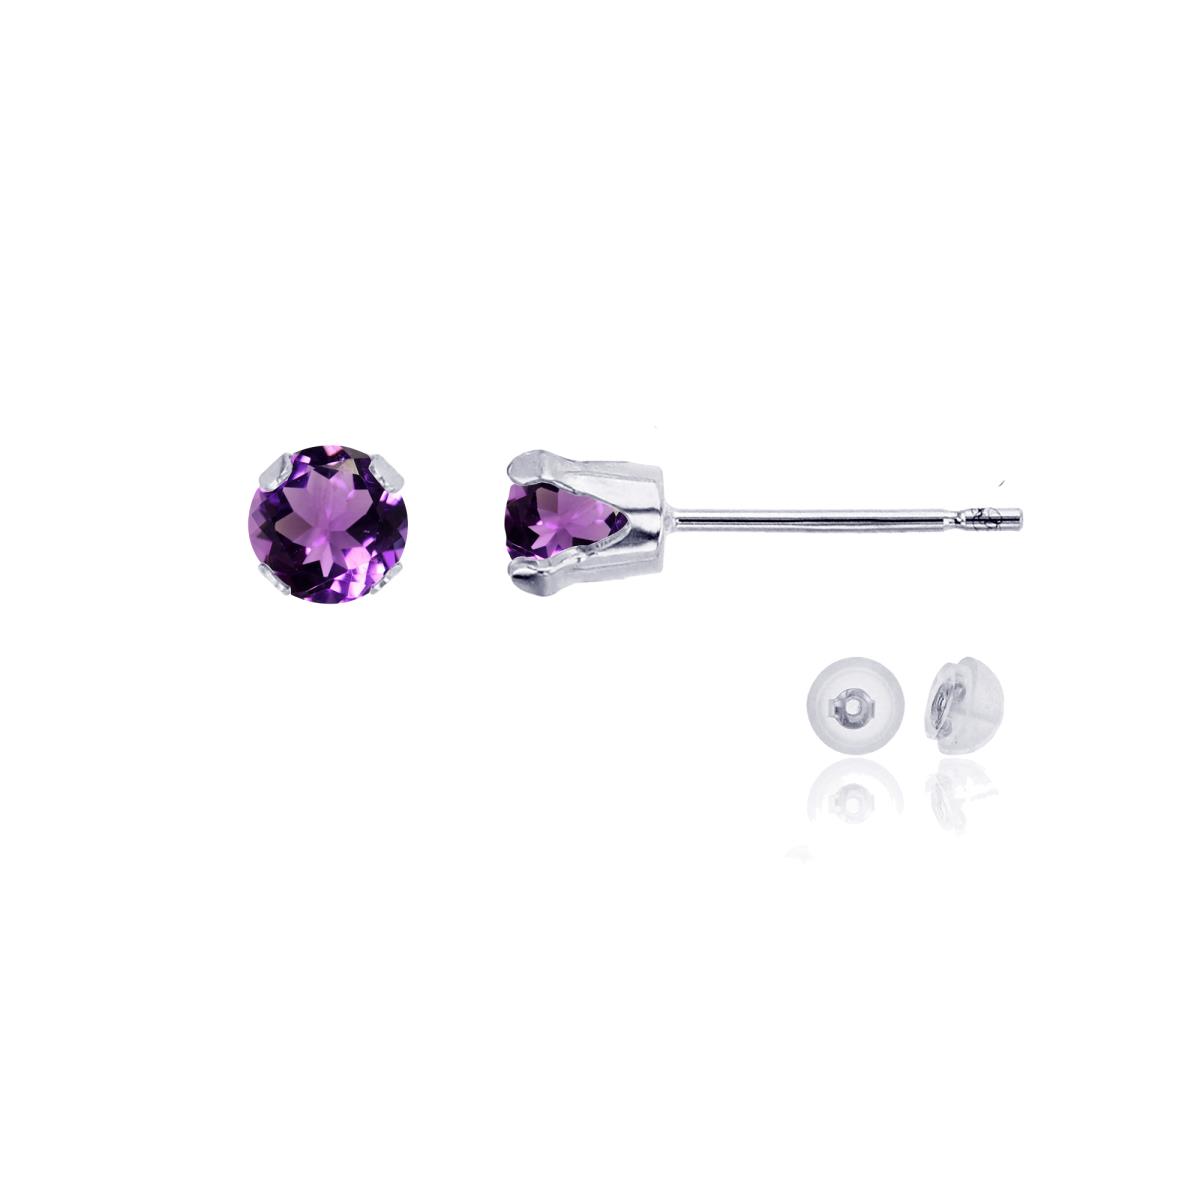 10K White Gold 4mm Round Amethyst Stud Earring with Silicone Back